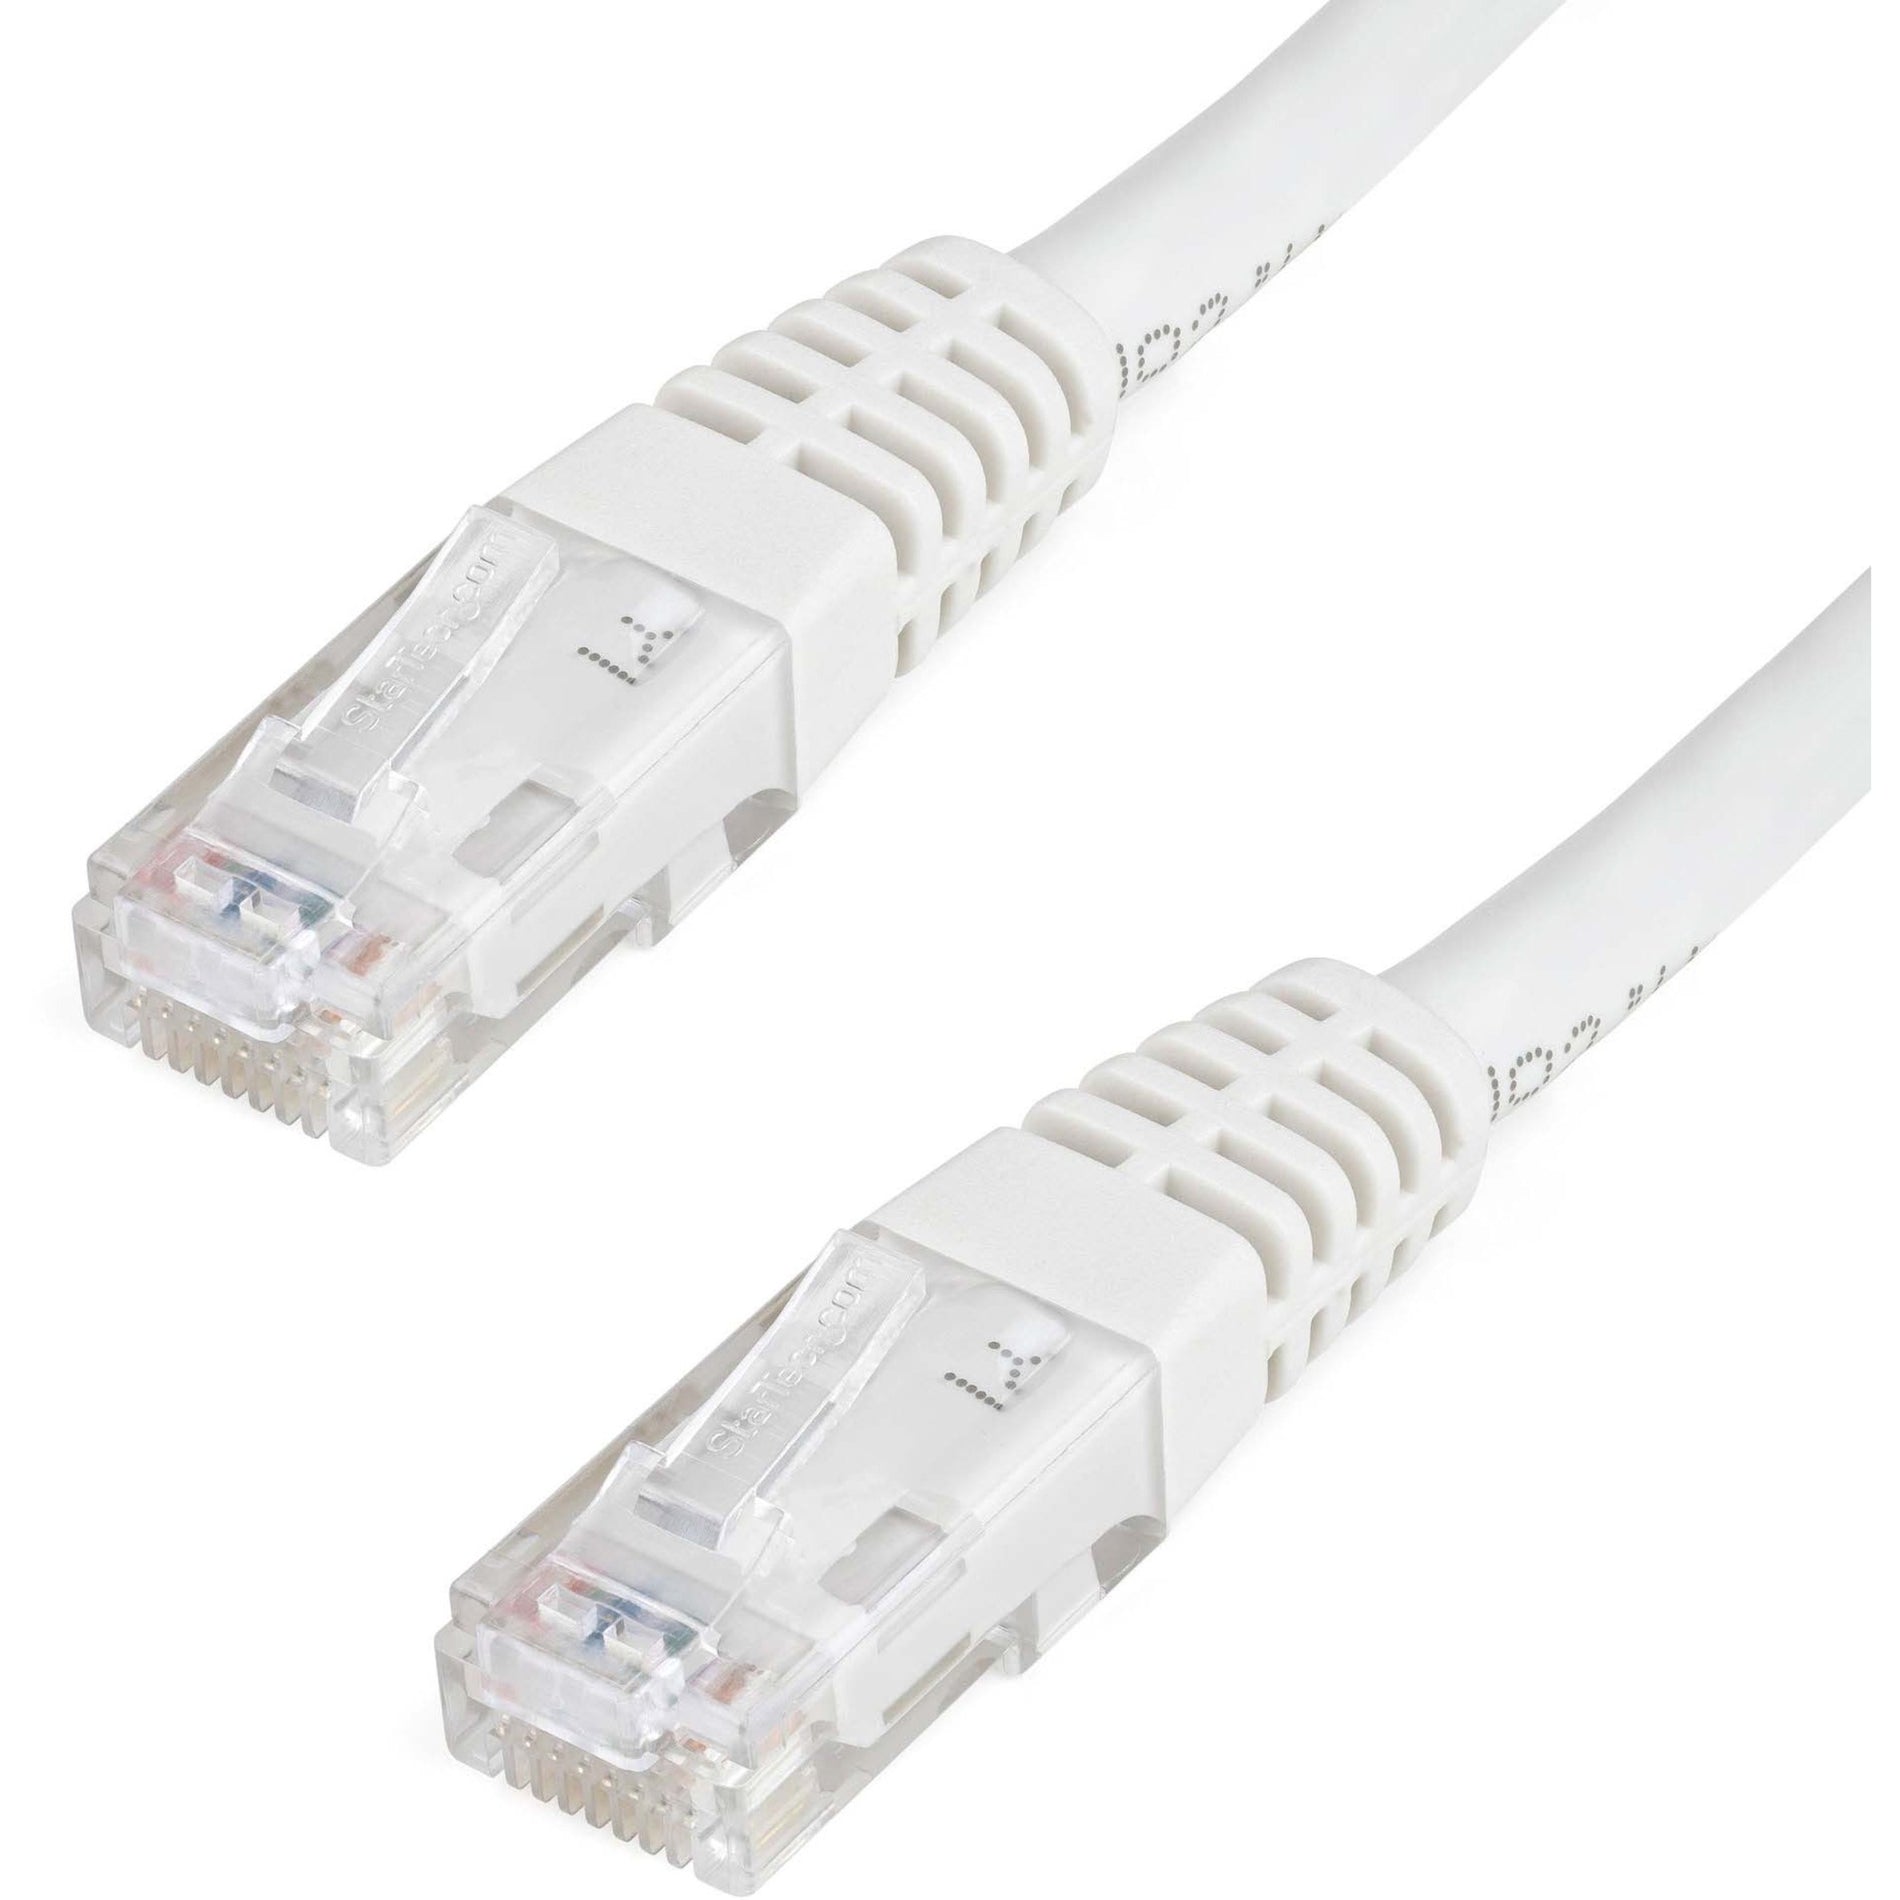 StarTech.com C6PATCH10WH 10ft white Molded Cat6 UTP Patch Cable ETL Verified, 10 Gbit/s Data Transfer Rate, PoE+, Snagless Boot